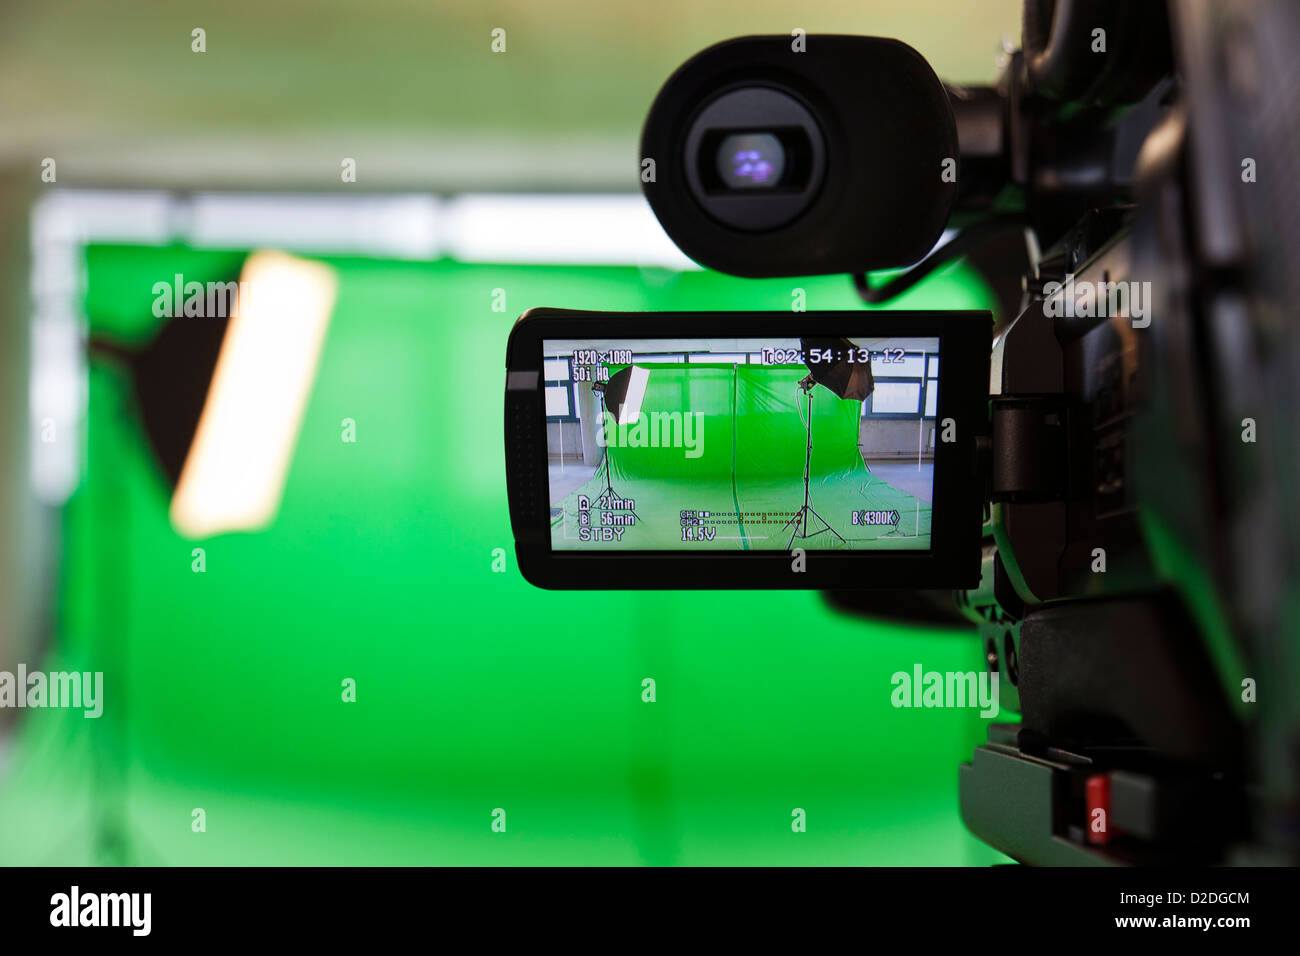 LCD display screen on a High Definition TV camera in a green screen studio. Stock Photo